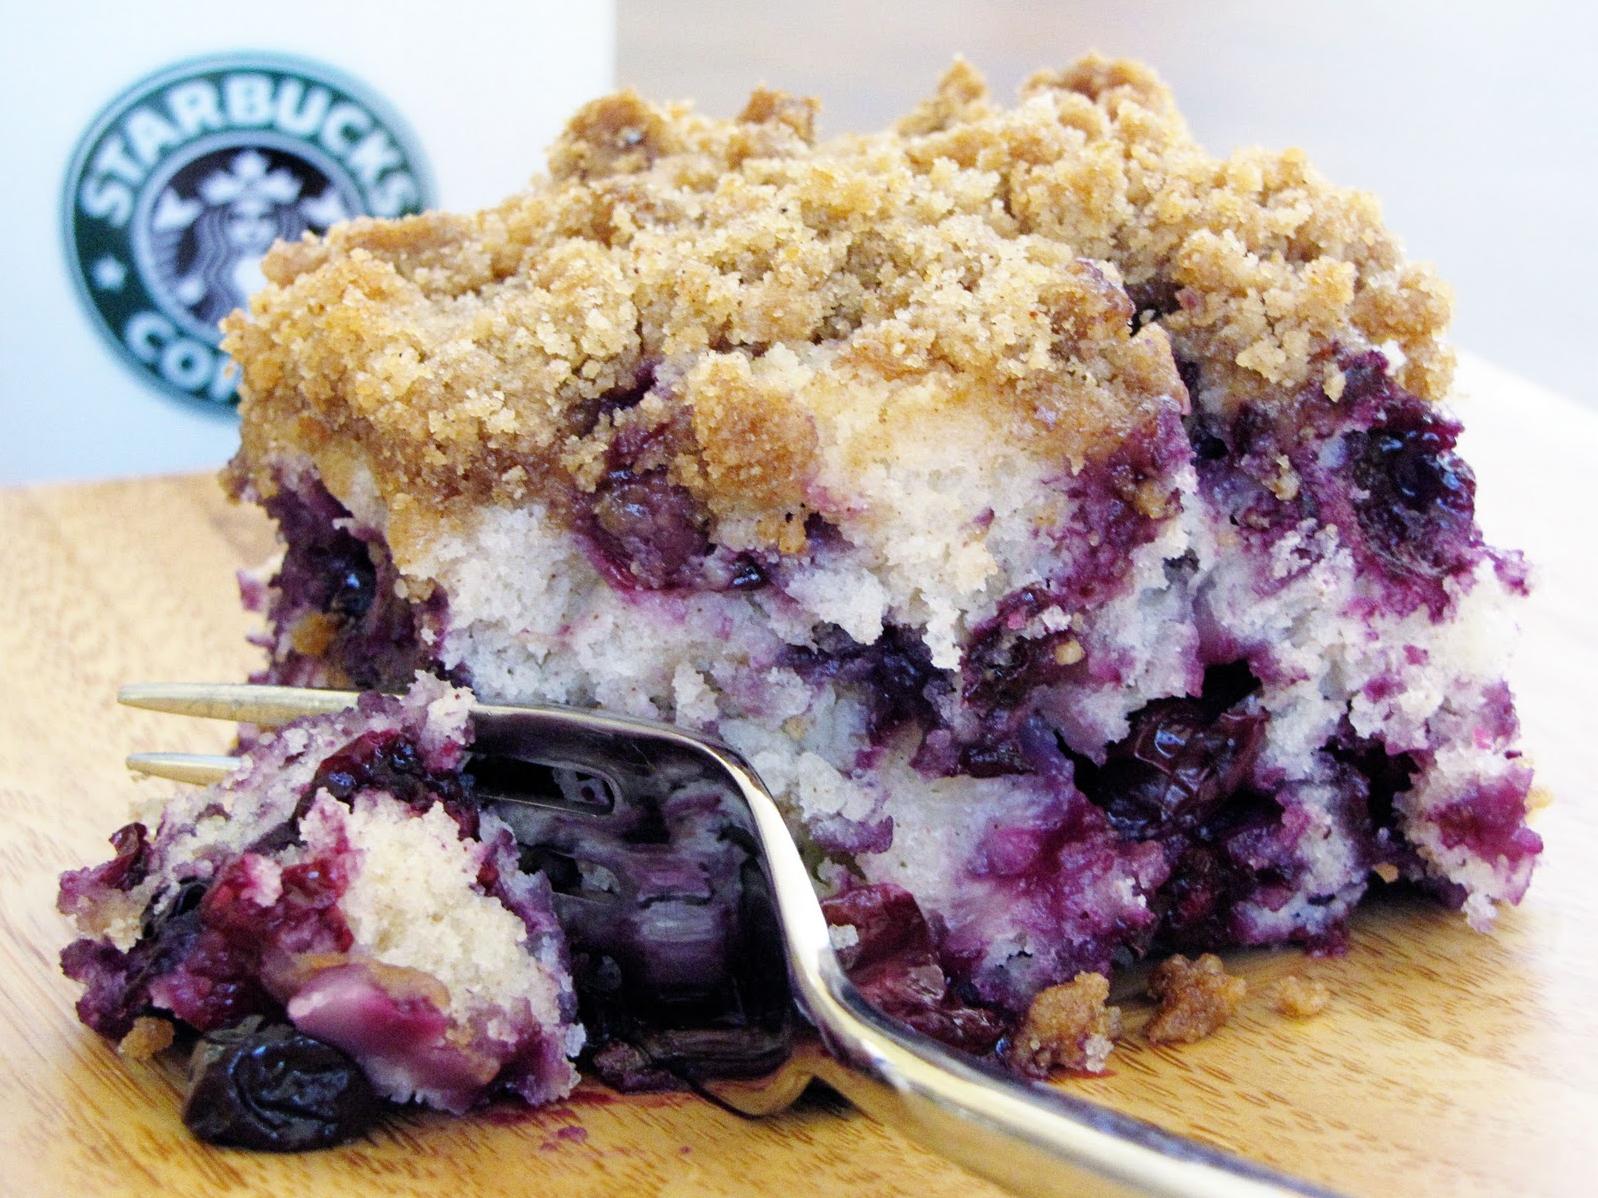  Moist cake, juicy blueberries, and a buttery crumb topping – what more could you ask for in a dessert?